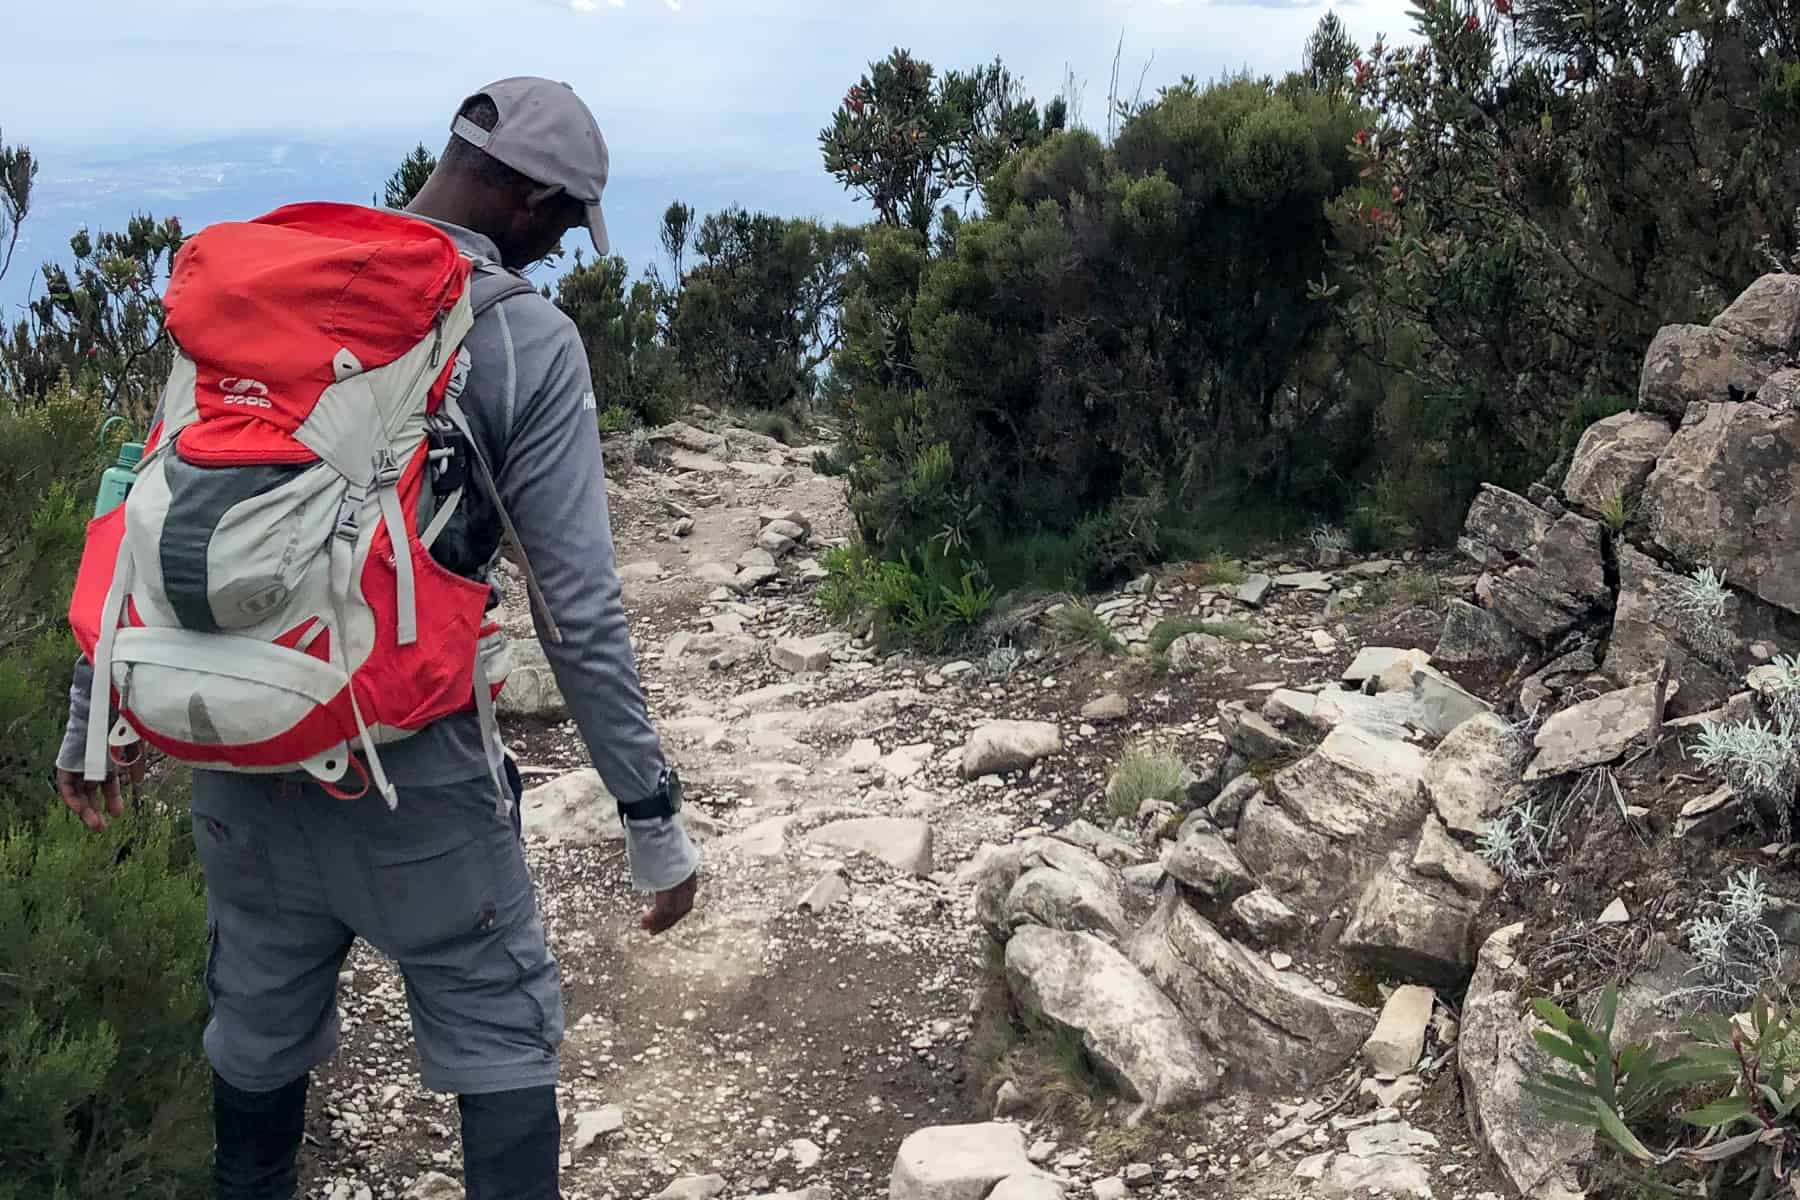 A man in grey clothing and carrying a red and grey bag walking on a white rock path through green shrubbery. 